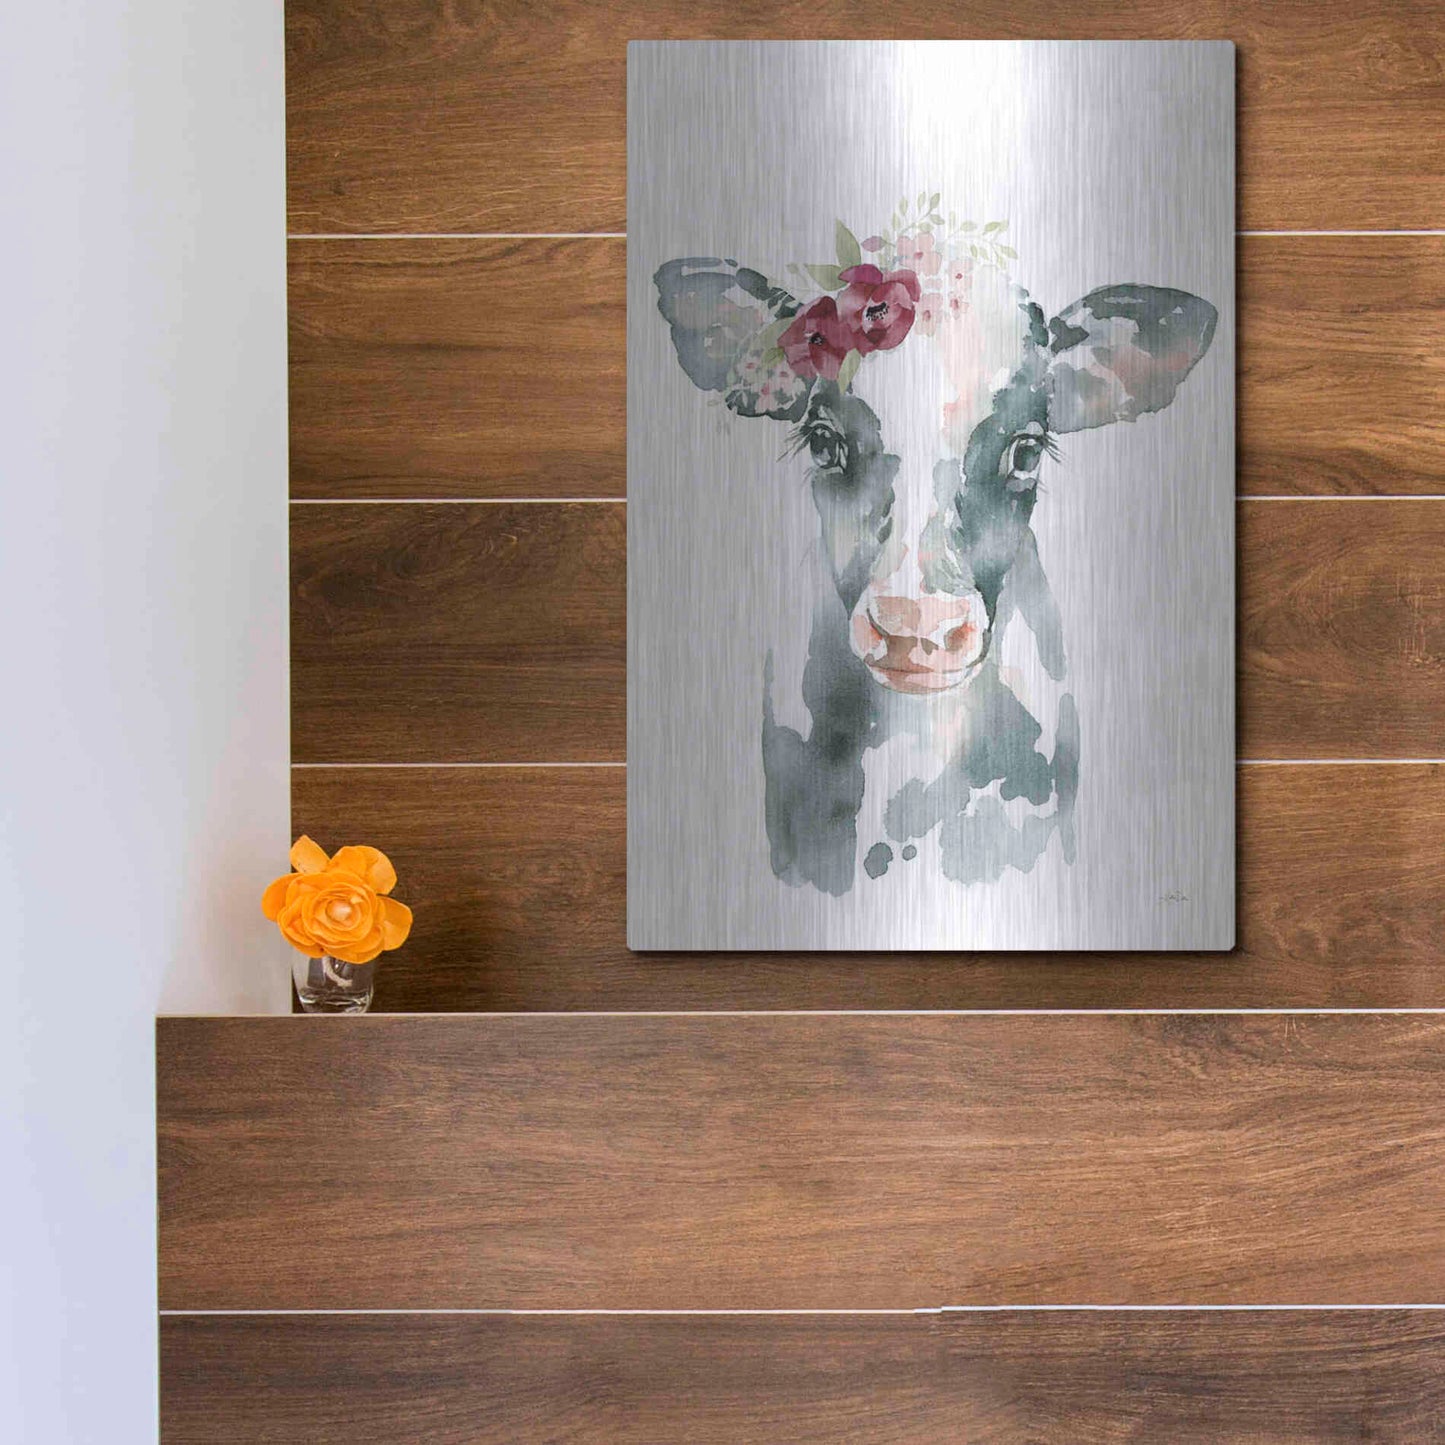 Luxe Metal Art 'Floral Cow' by Katrina Pete, Metal Wall Art,12x16